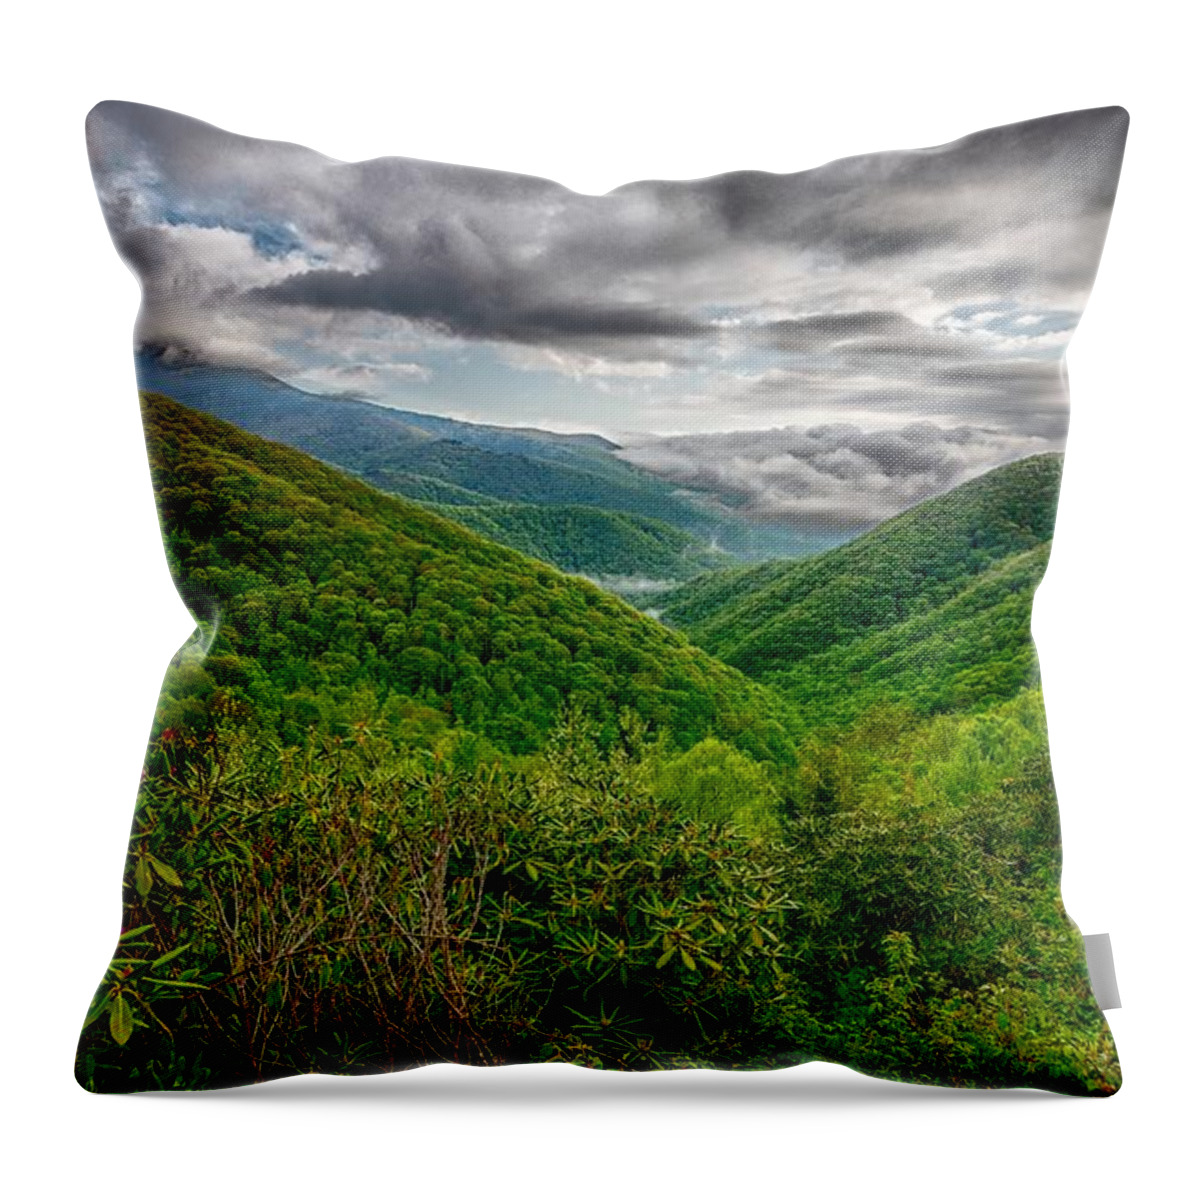 Rock Throw Pillow featuring the photograph Blue Ridge Mountains Near Mount Mitchell And Cragy Gardens #17 by Alex Grichenko